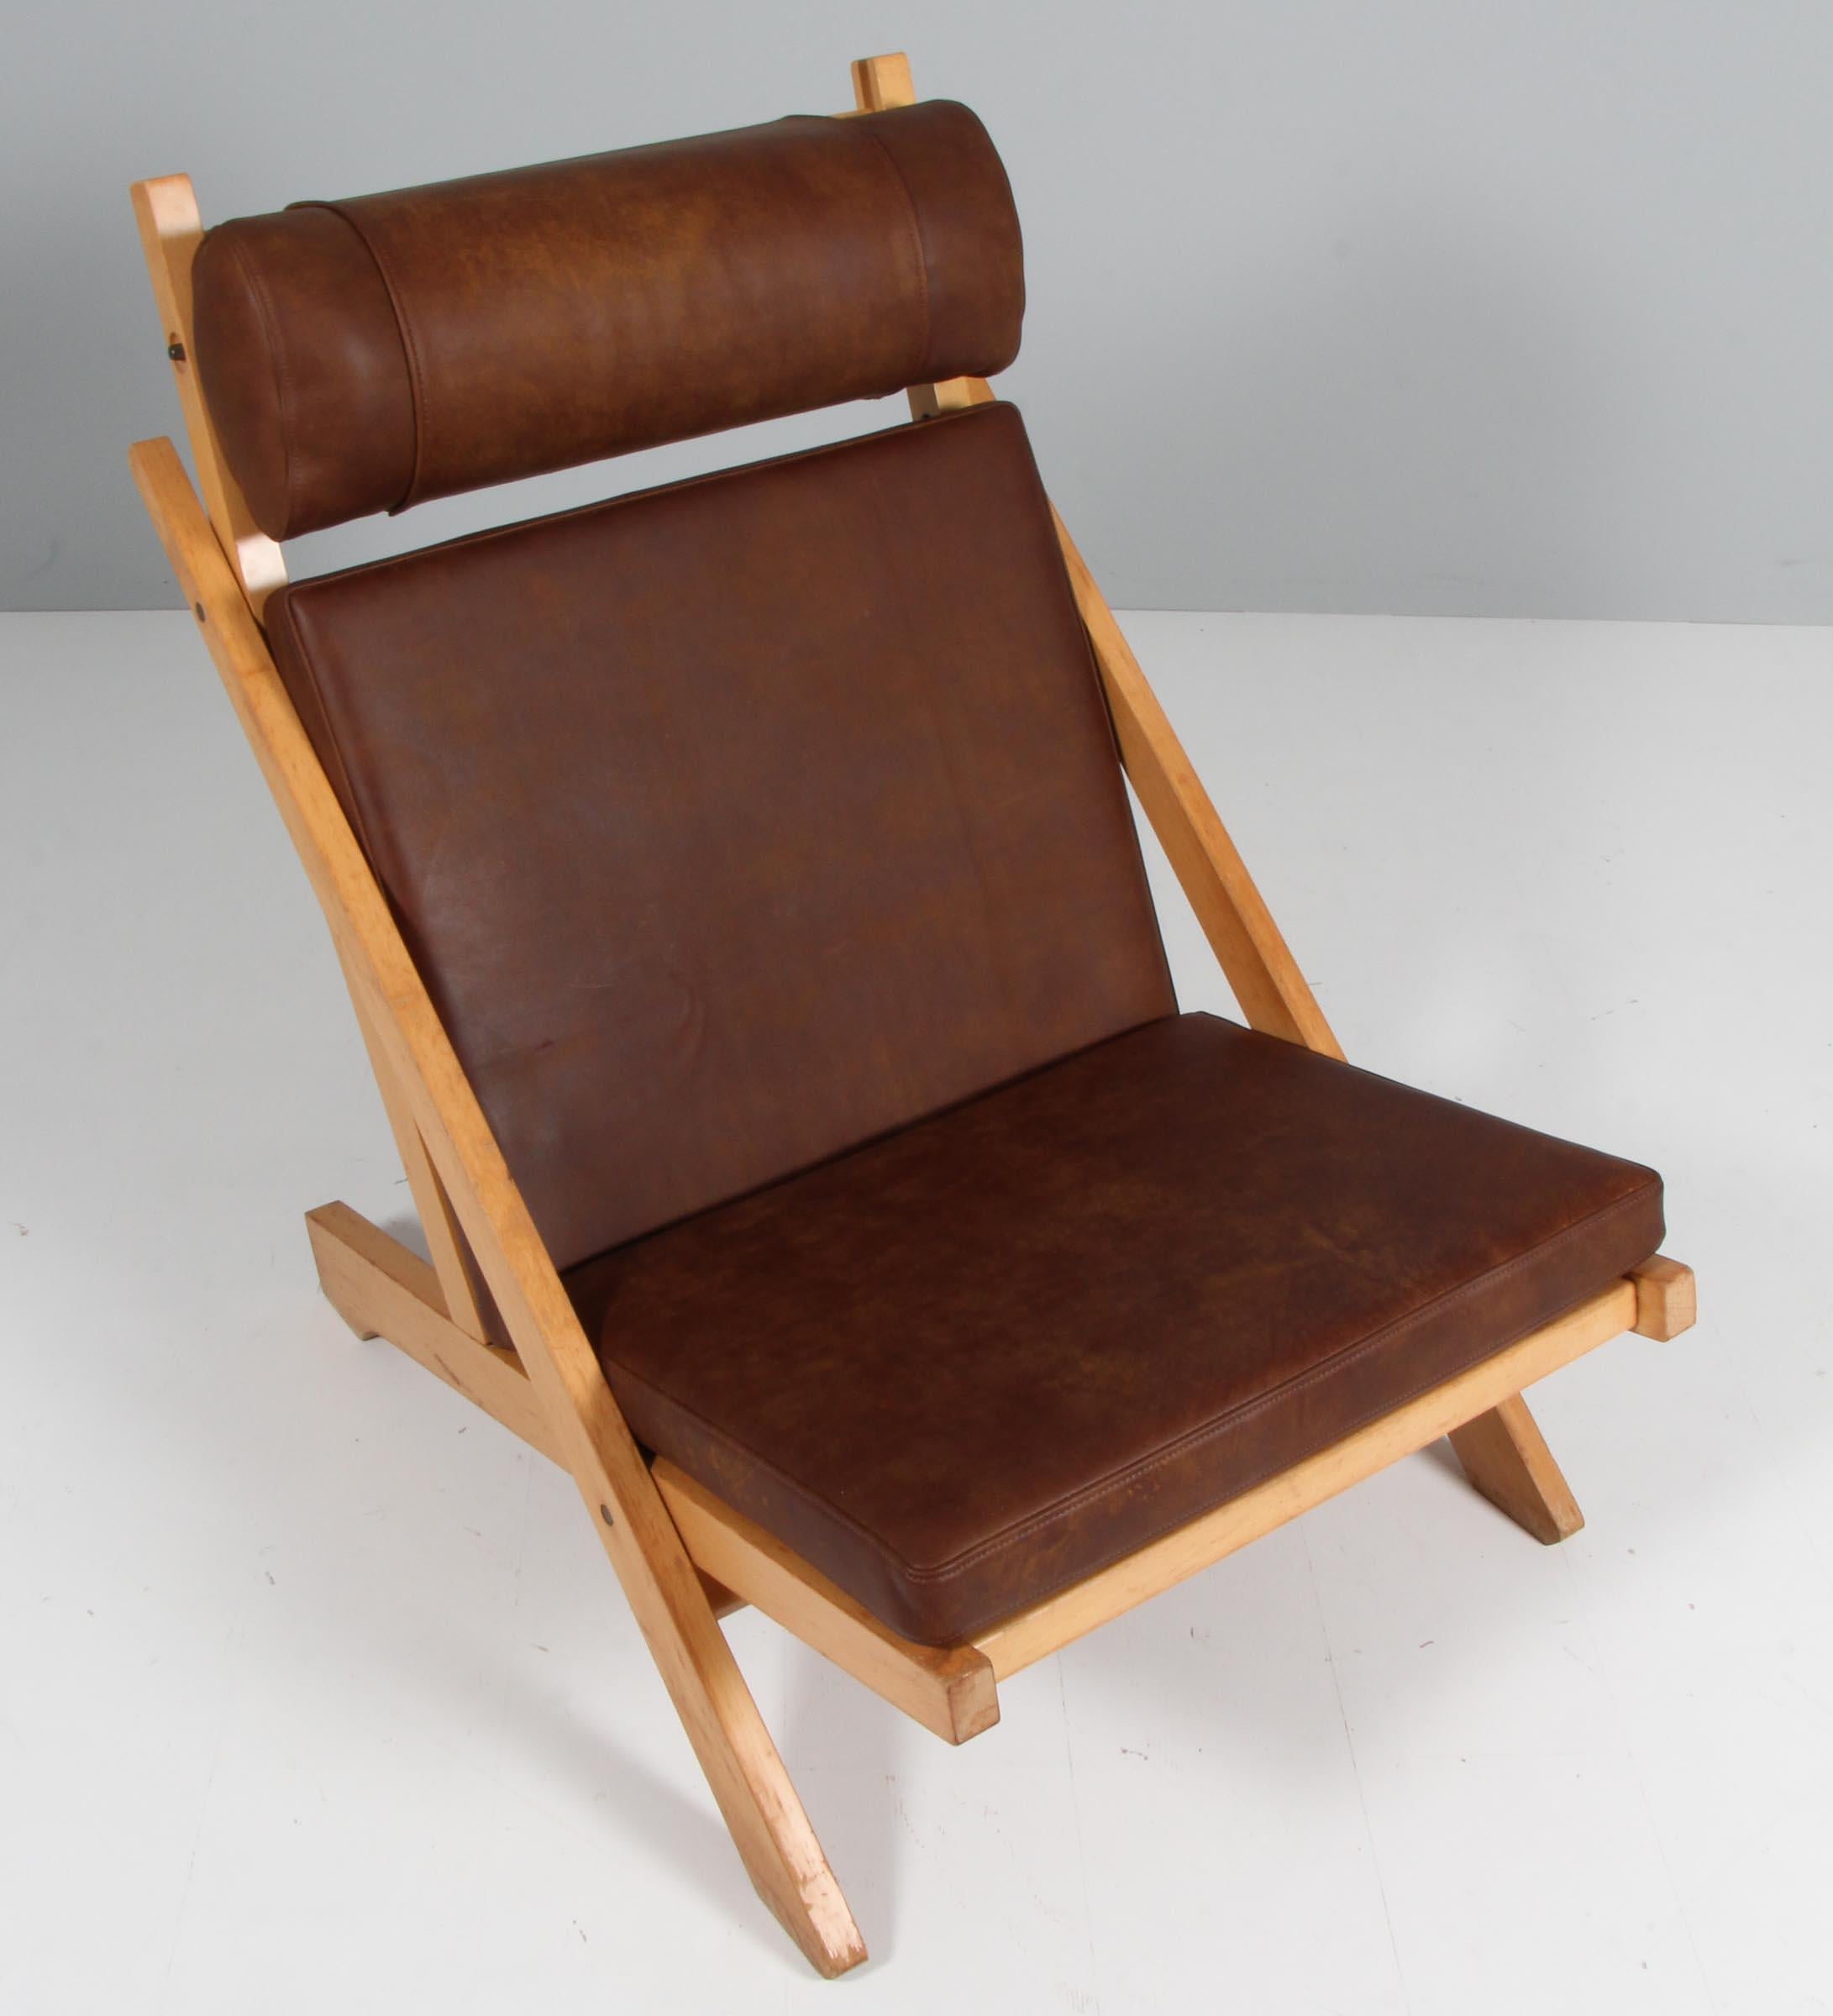 Hans J. Wegner Lounge chair with frame of solid  beech. With boat cord in the seat. 

New upholstered with with aniline leather details.

Model CH3, made by Carl Hansen. Rarely seen model.